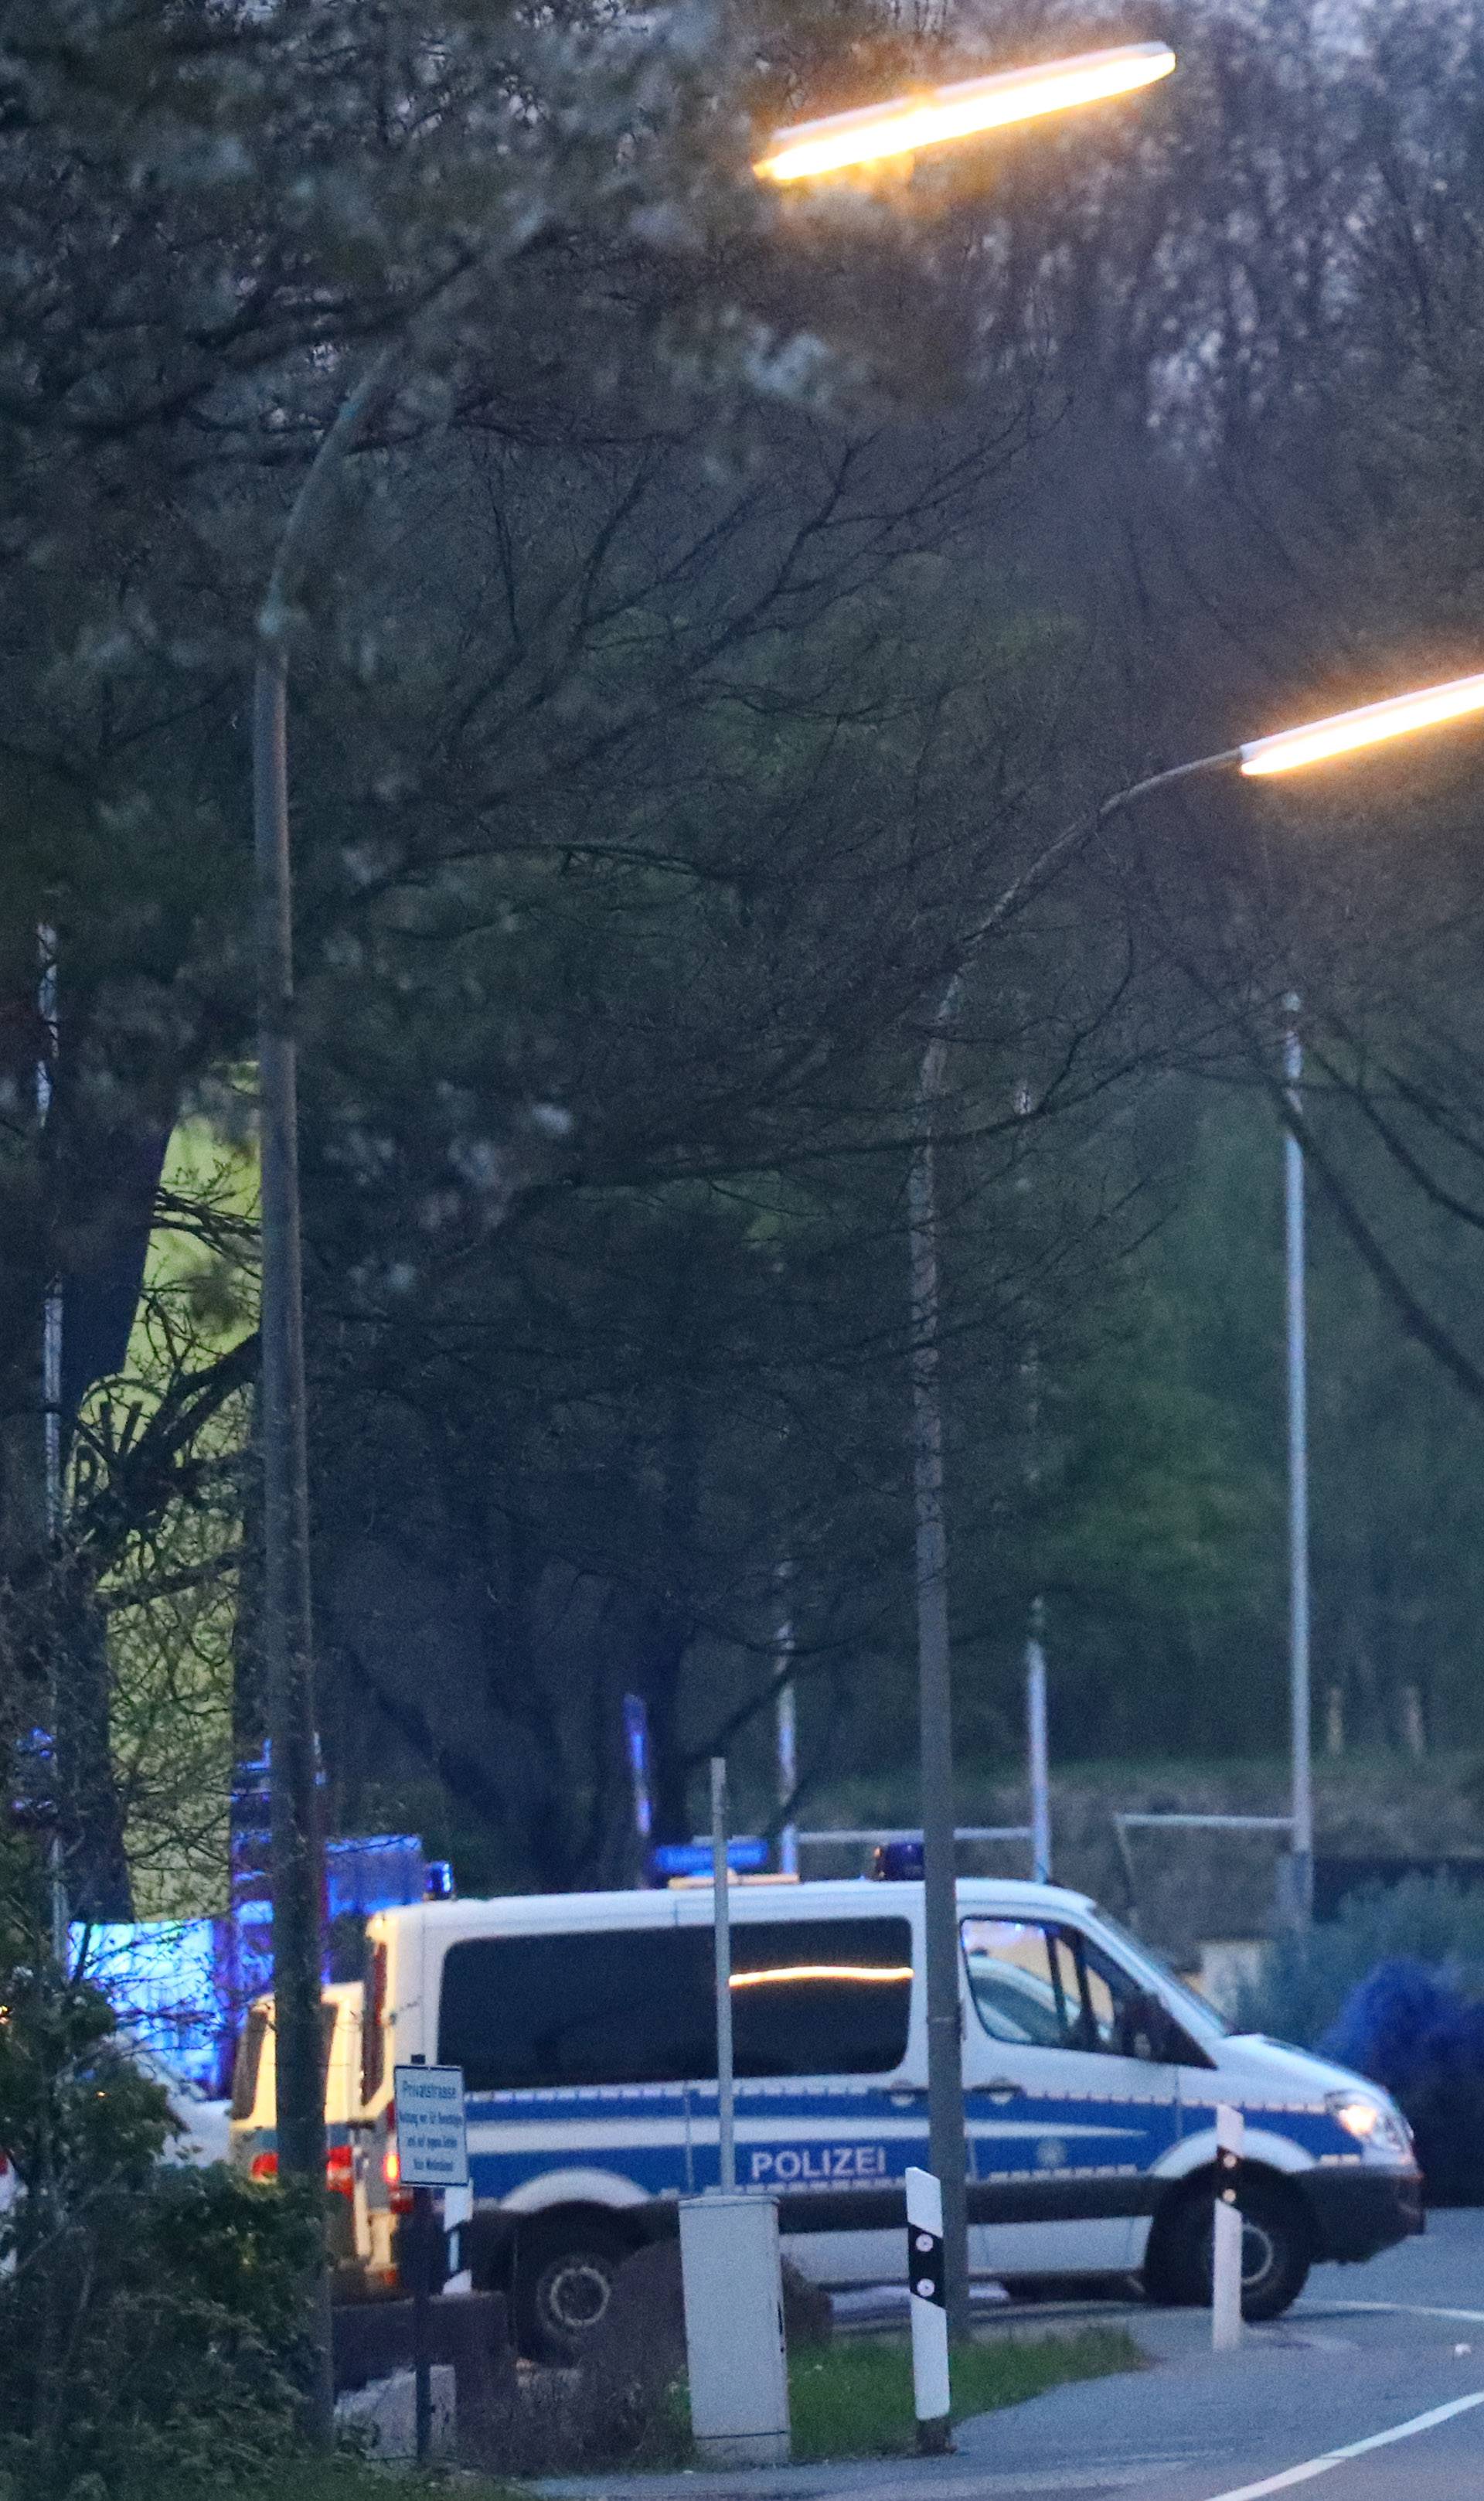 Police and emergency vehicles are seen near the Borussia Dortmund team hotel after an explosion before the game